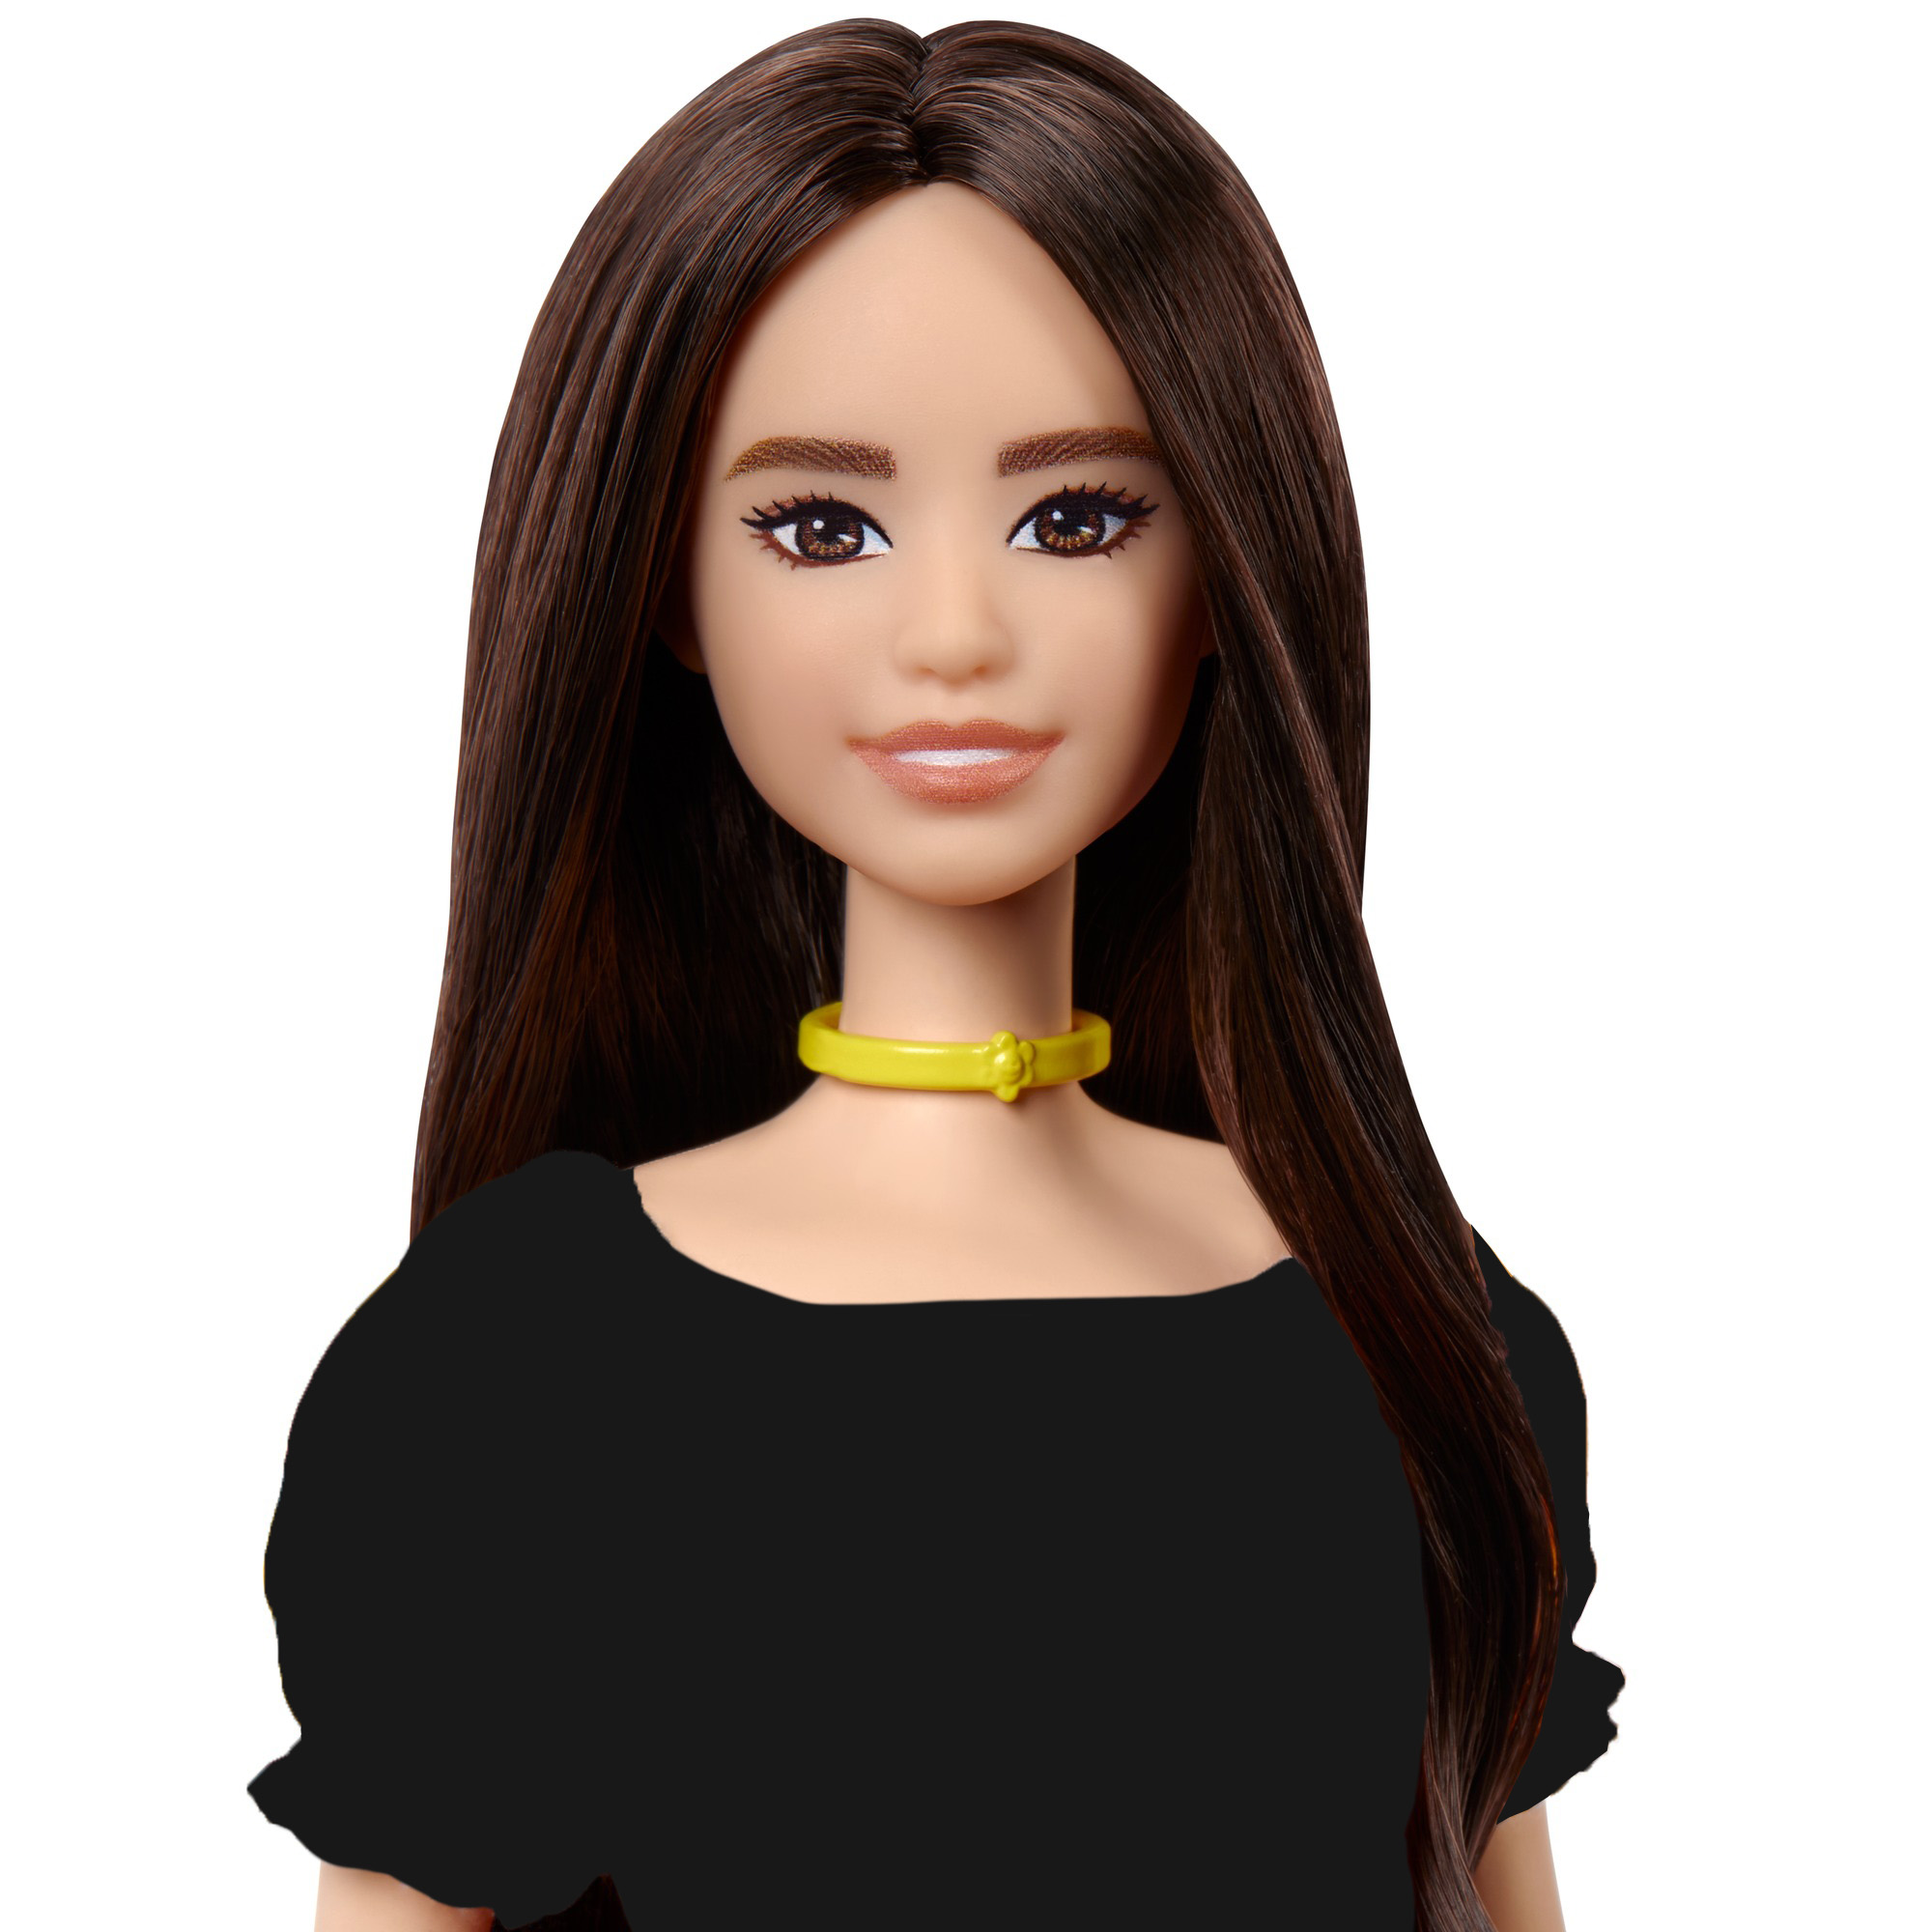 Barbie Styled By You con capelli neri - Barbie